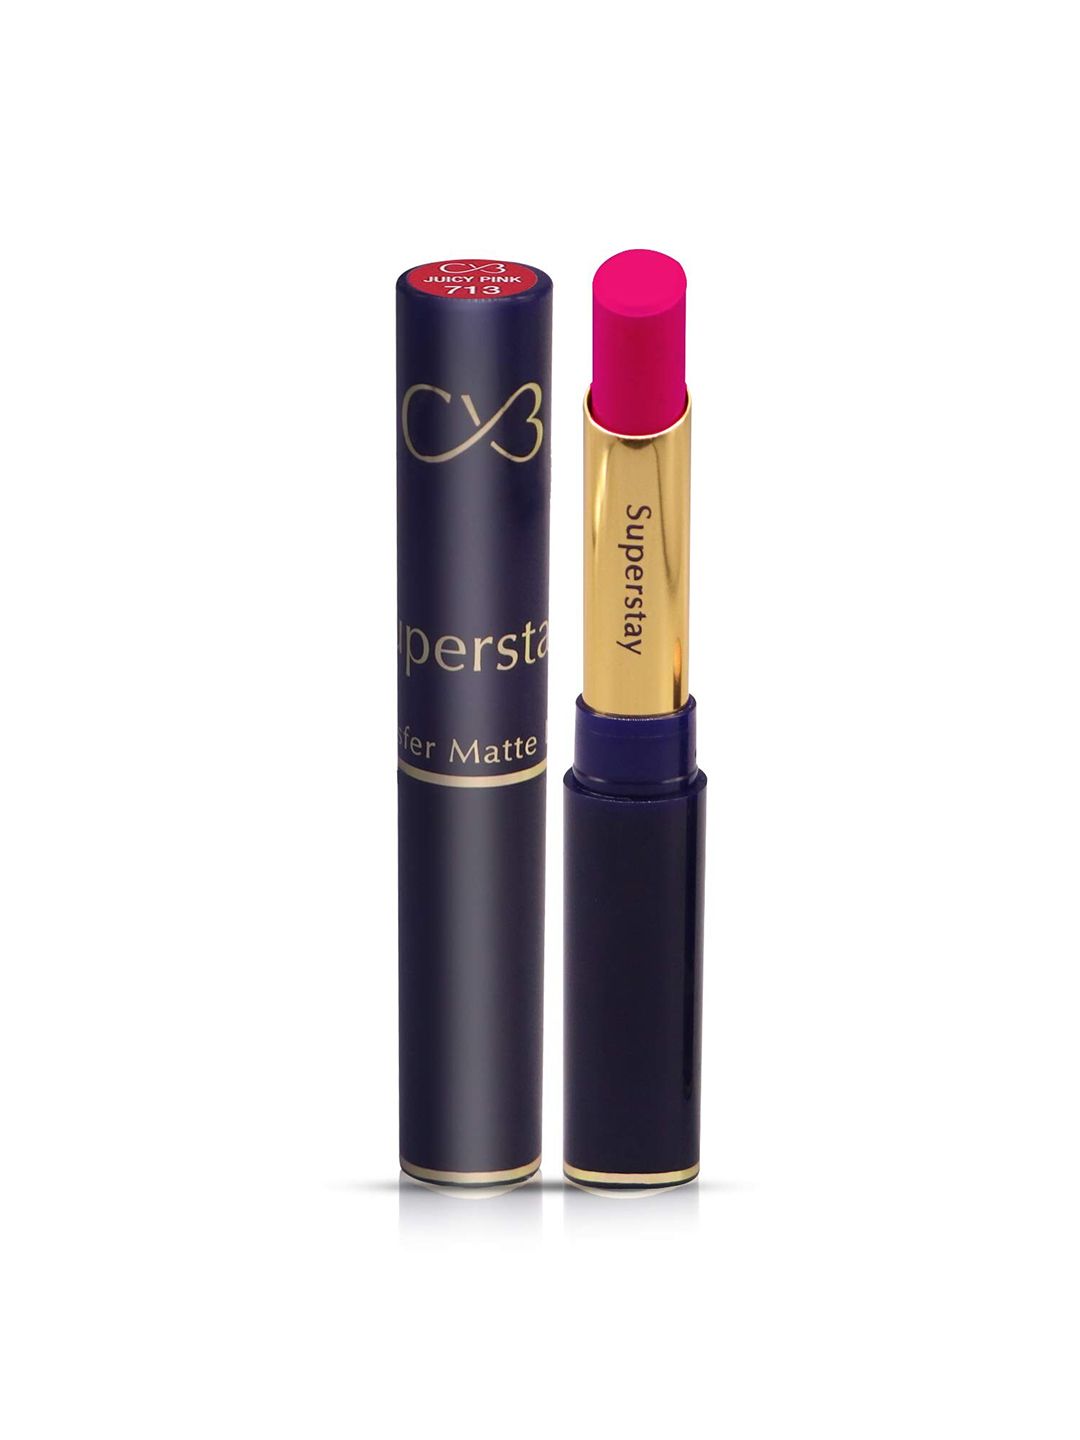 CVB Super Stay Non-Transfer Matte Lipstick 3.5 g - Juicy Pink 713 Price in India